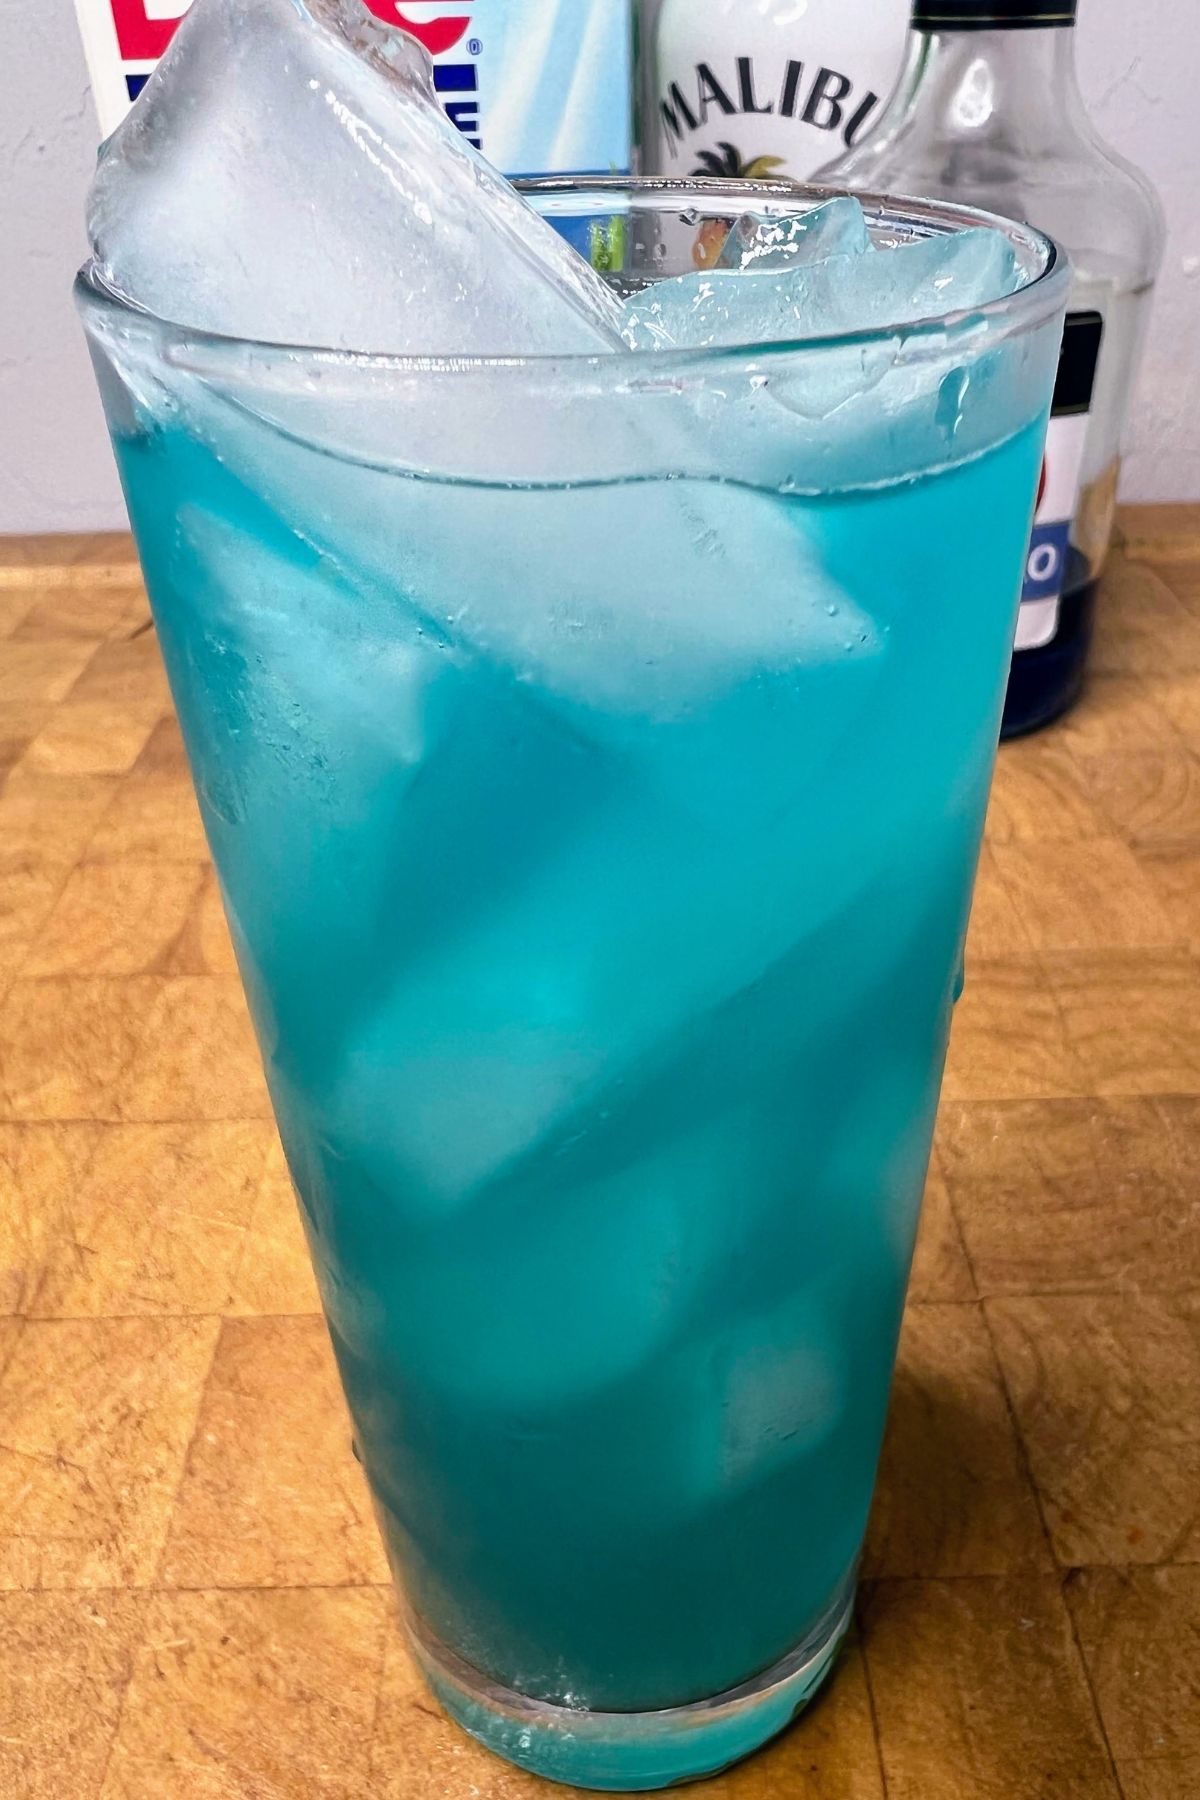 Electric smurf drink on a wooden table.